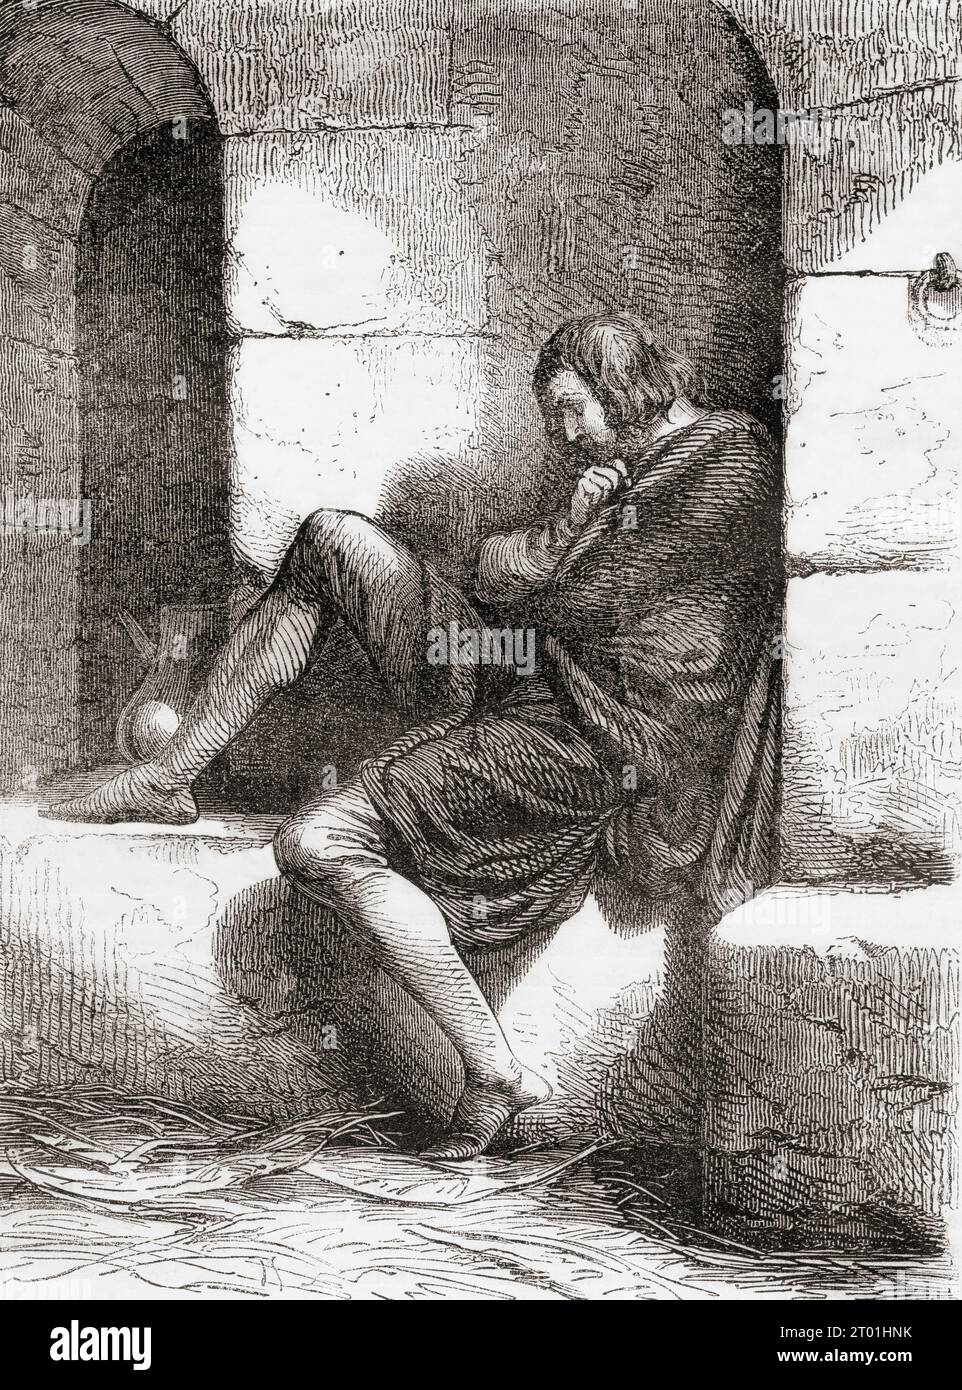 Robert II of Normandy, or Robert Curthose, c. 1051 –1134.  Eldest son of William the Conqueror who succeeded his father as Duke of Normandy in 1087 and unsuccessful claimant to the English throne. Seen here in prison in Cardiff castle after being imprisoned in Devizes Castle in Wiltshire for twenty years after his defeat by Henry I at the Battle of Tinchebray.  From Cassell's Illustrated History of England, published 1857. Stock Photo